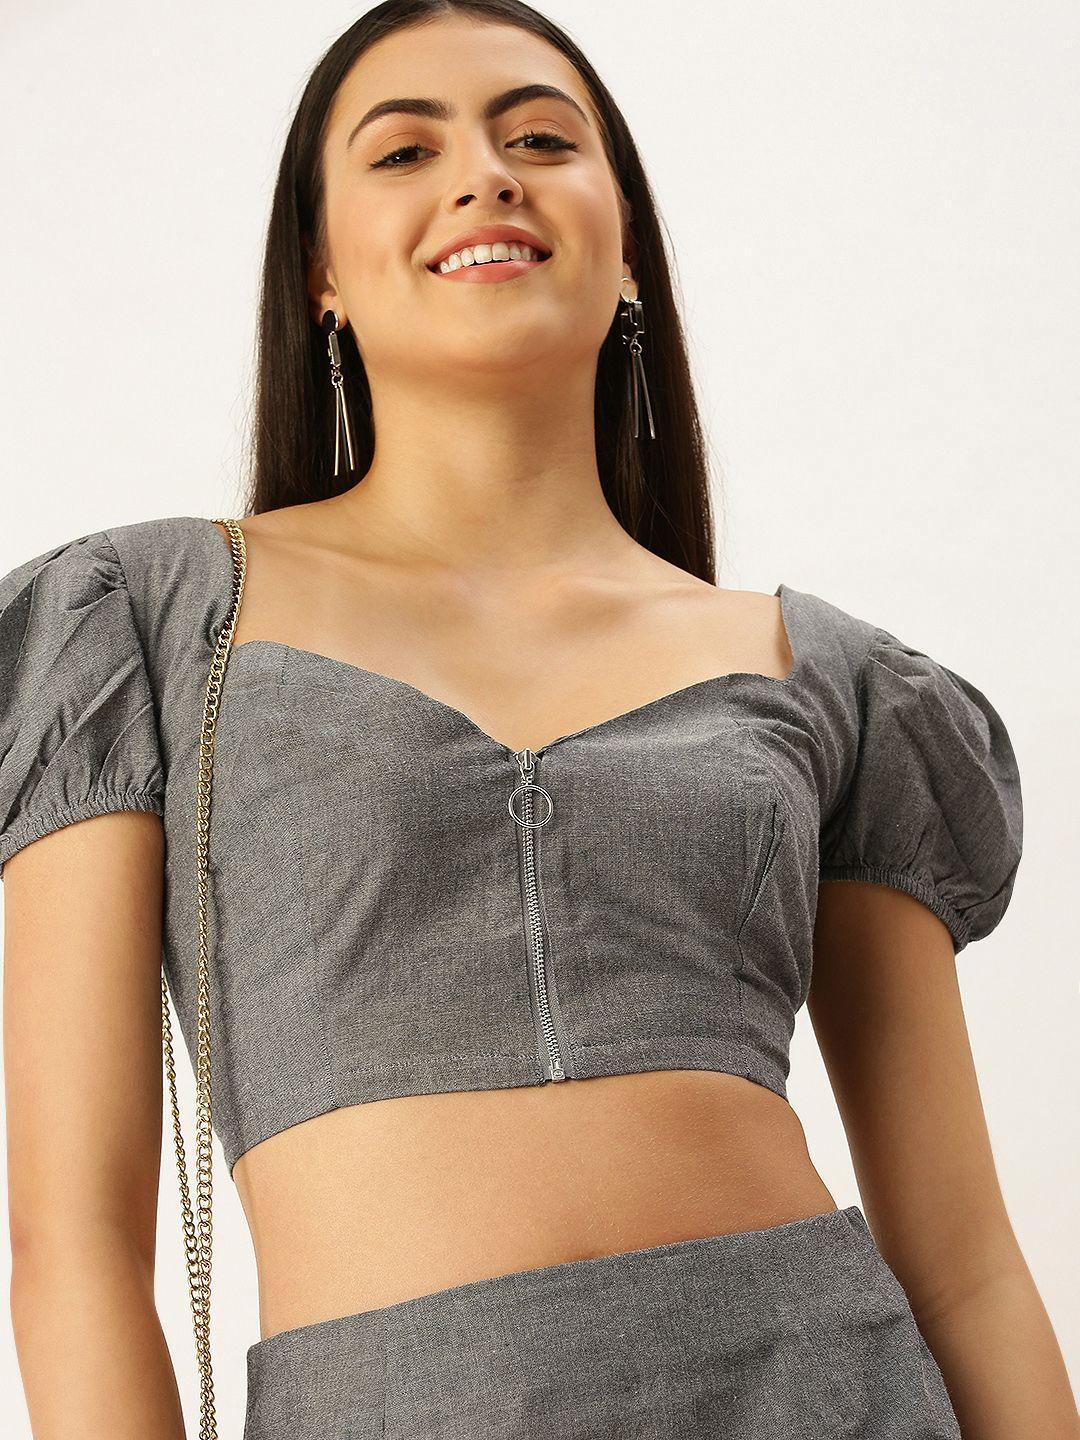 forever-21-women-grey-pure-cotton-crop-top-&-mini-skirt-co-ords